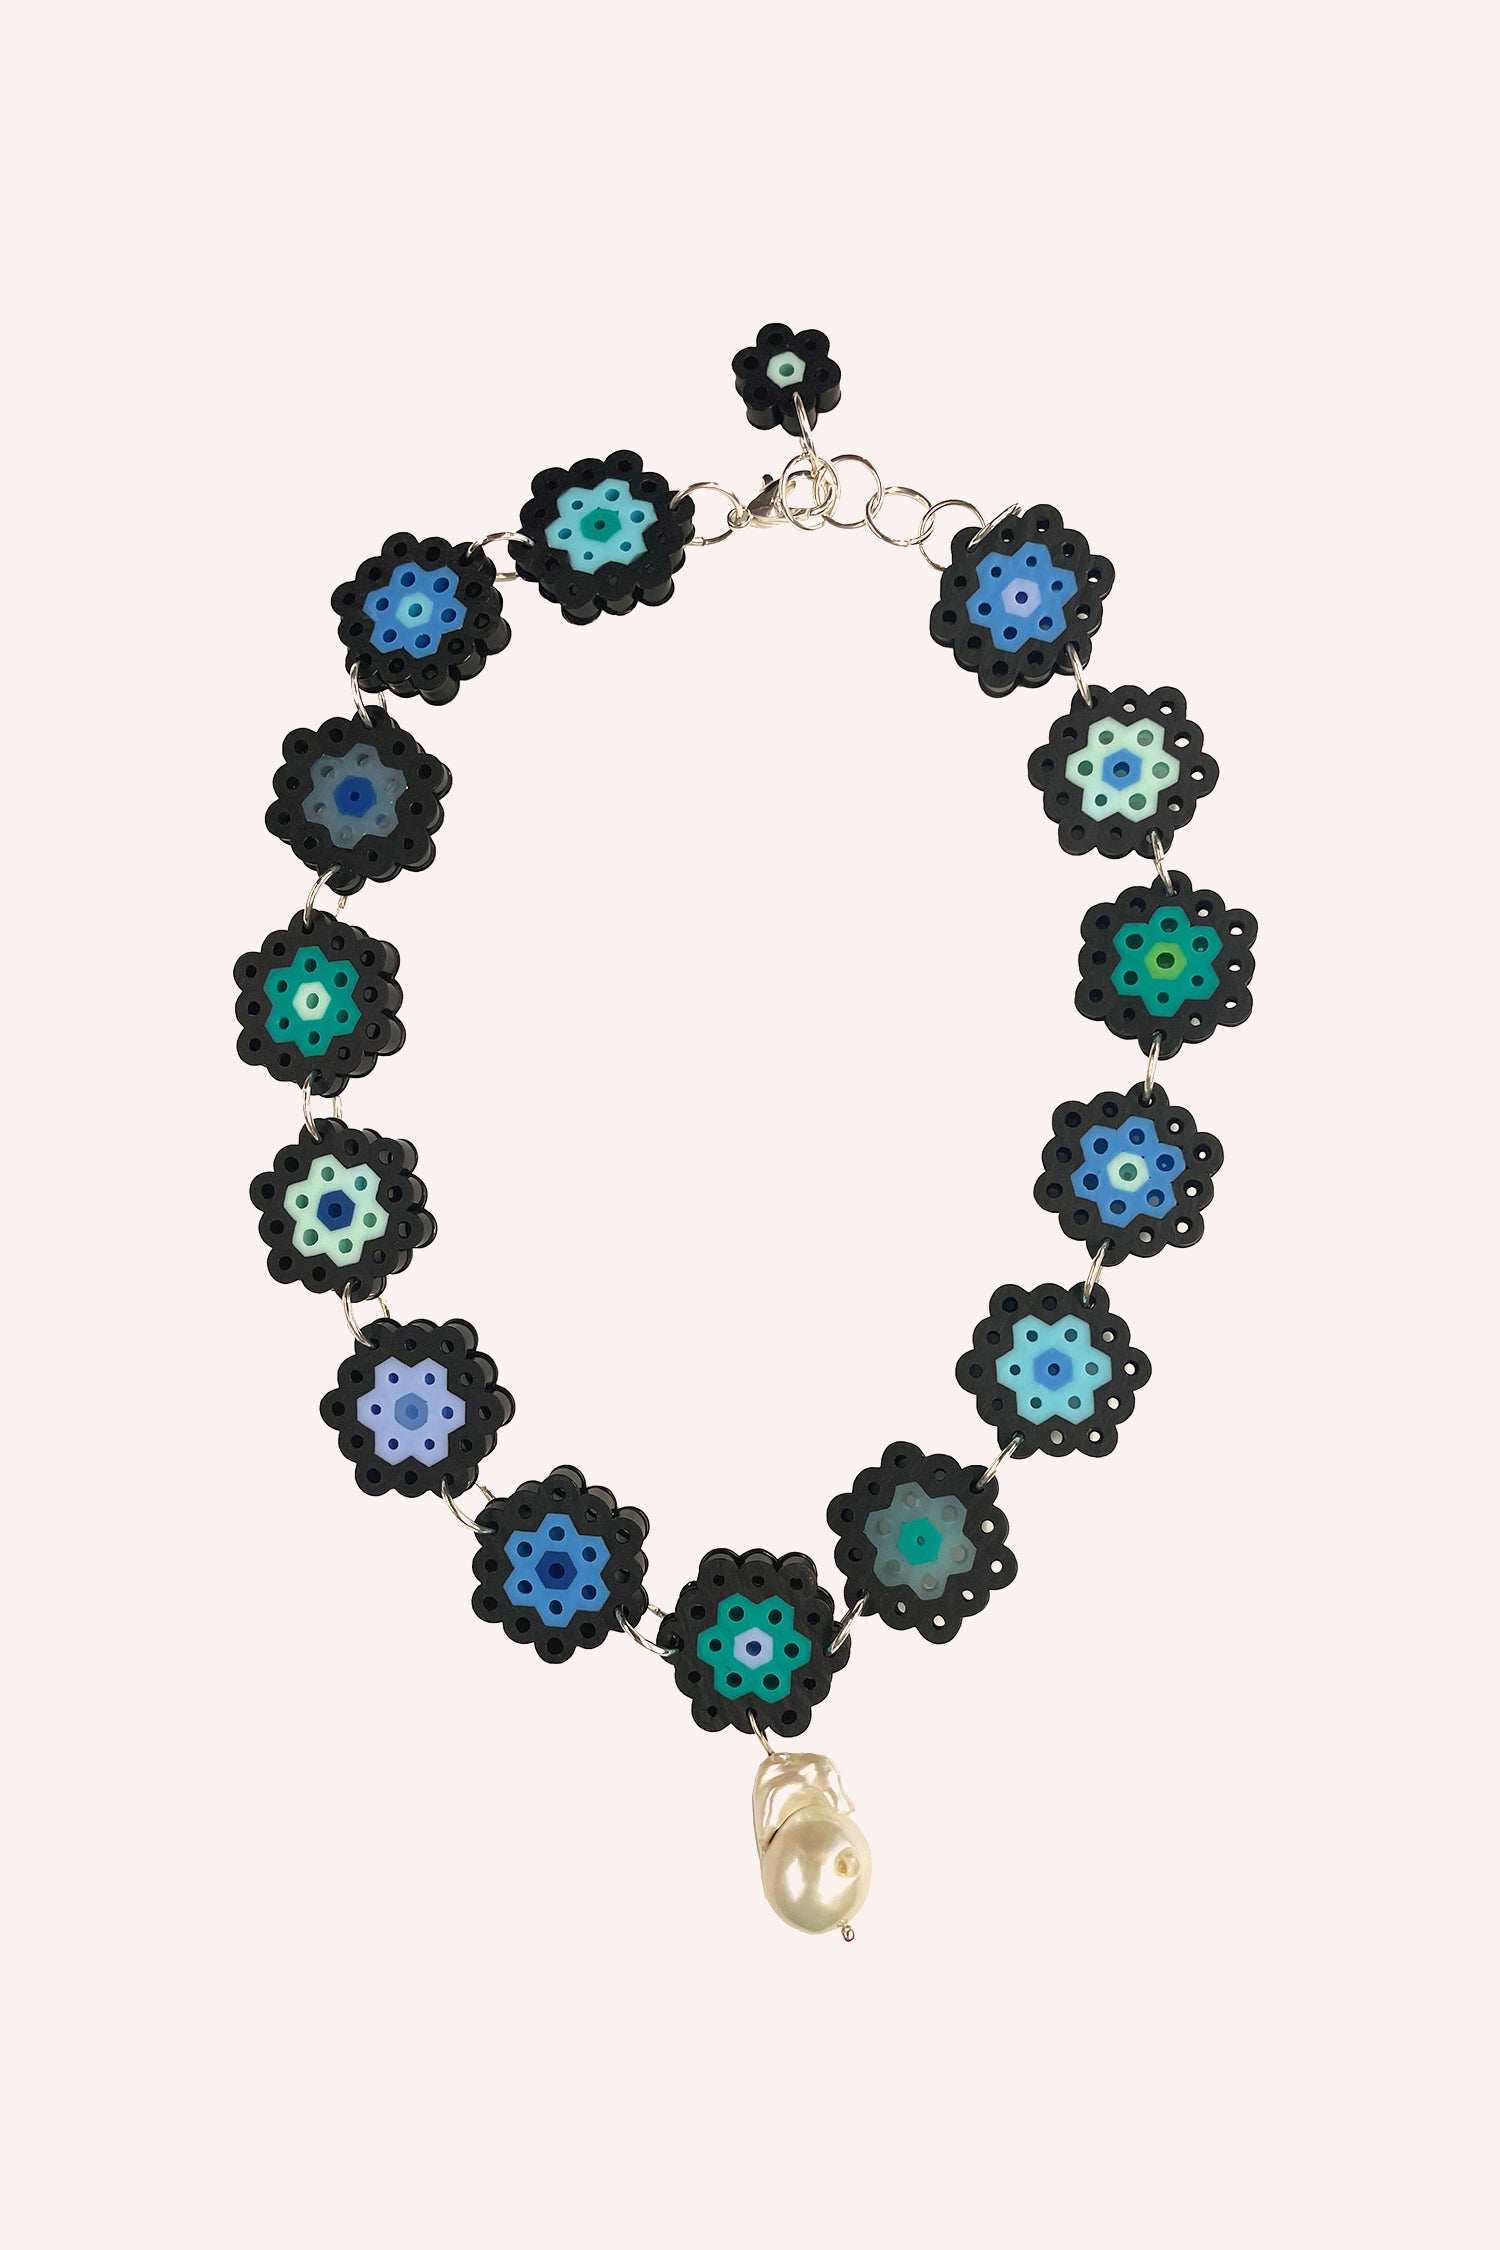 The Daisy Chain Single Pearl Choker in Teal features 14 daisy-like beads linked together with a chain and a pearl pendant